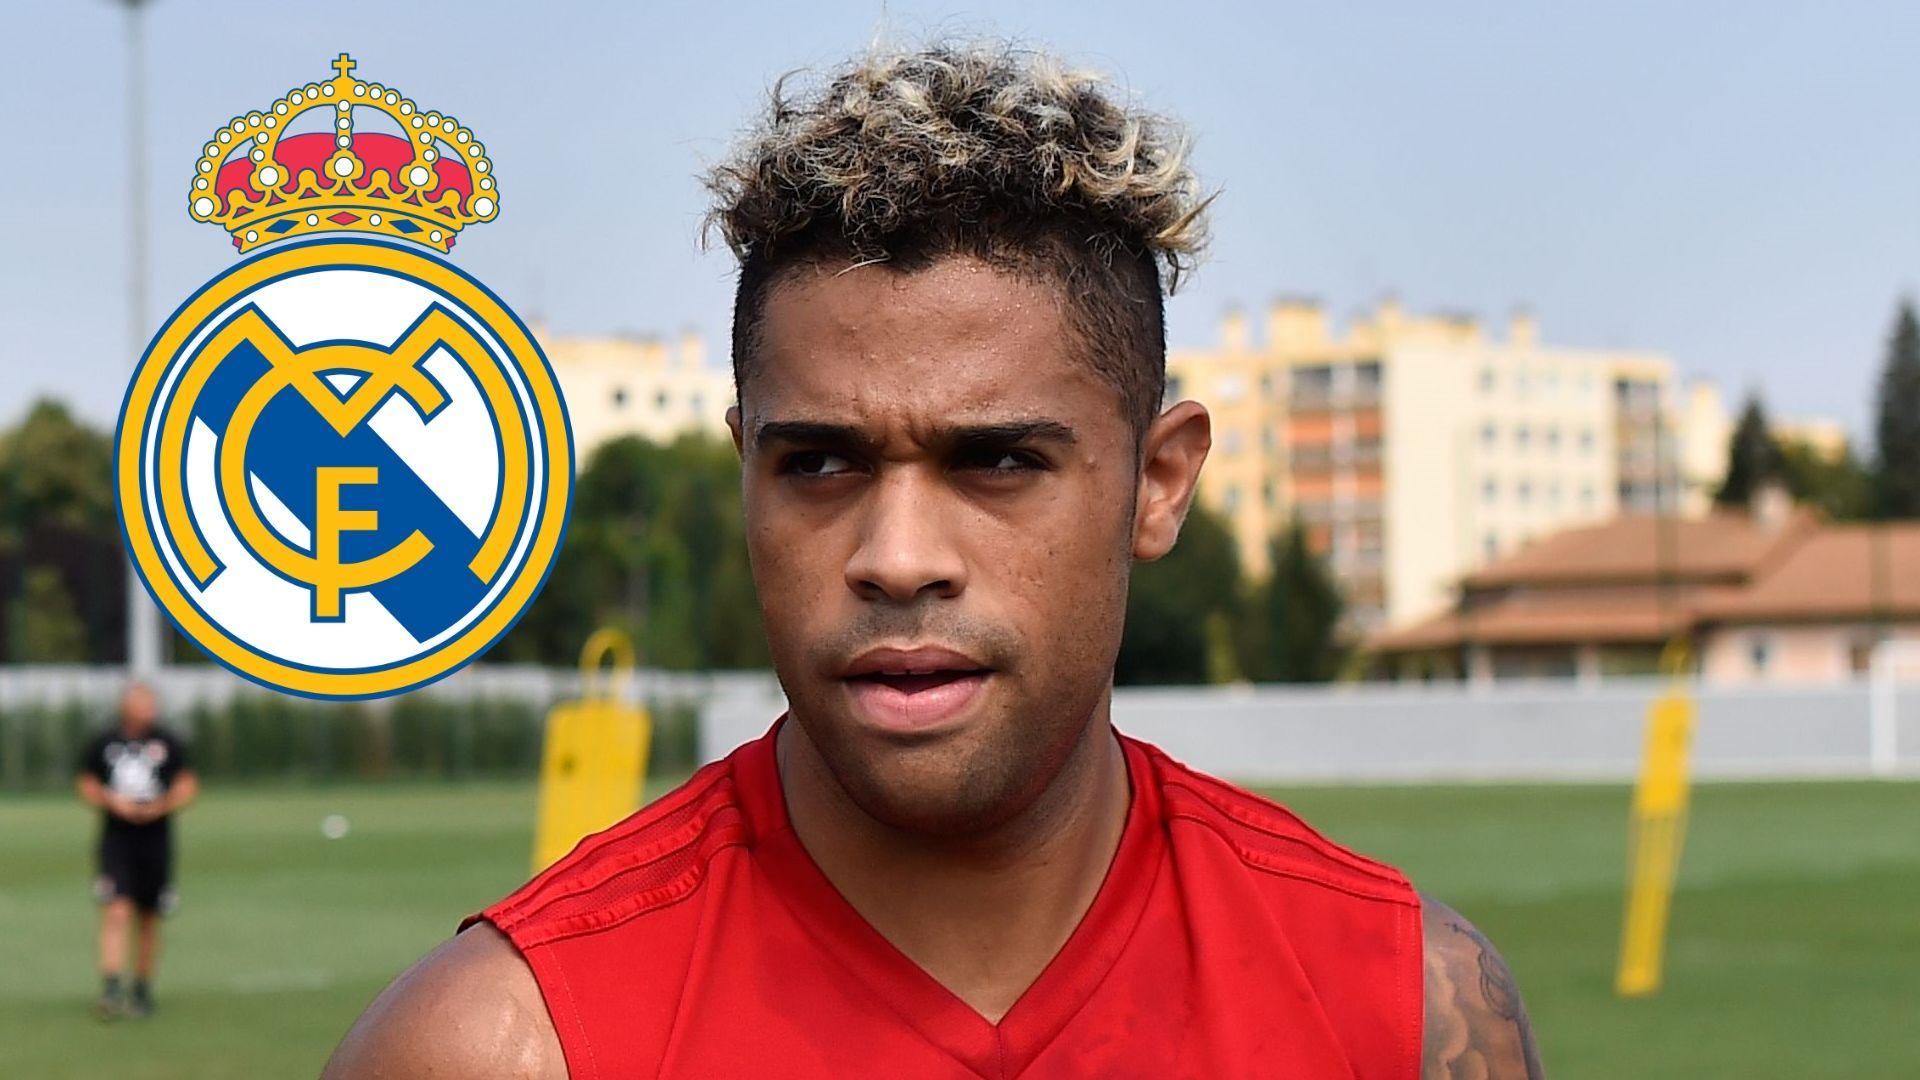 Mariano Diaz excited to inherit Ronaldo's 7 for Real Madrid. Soccer